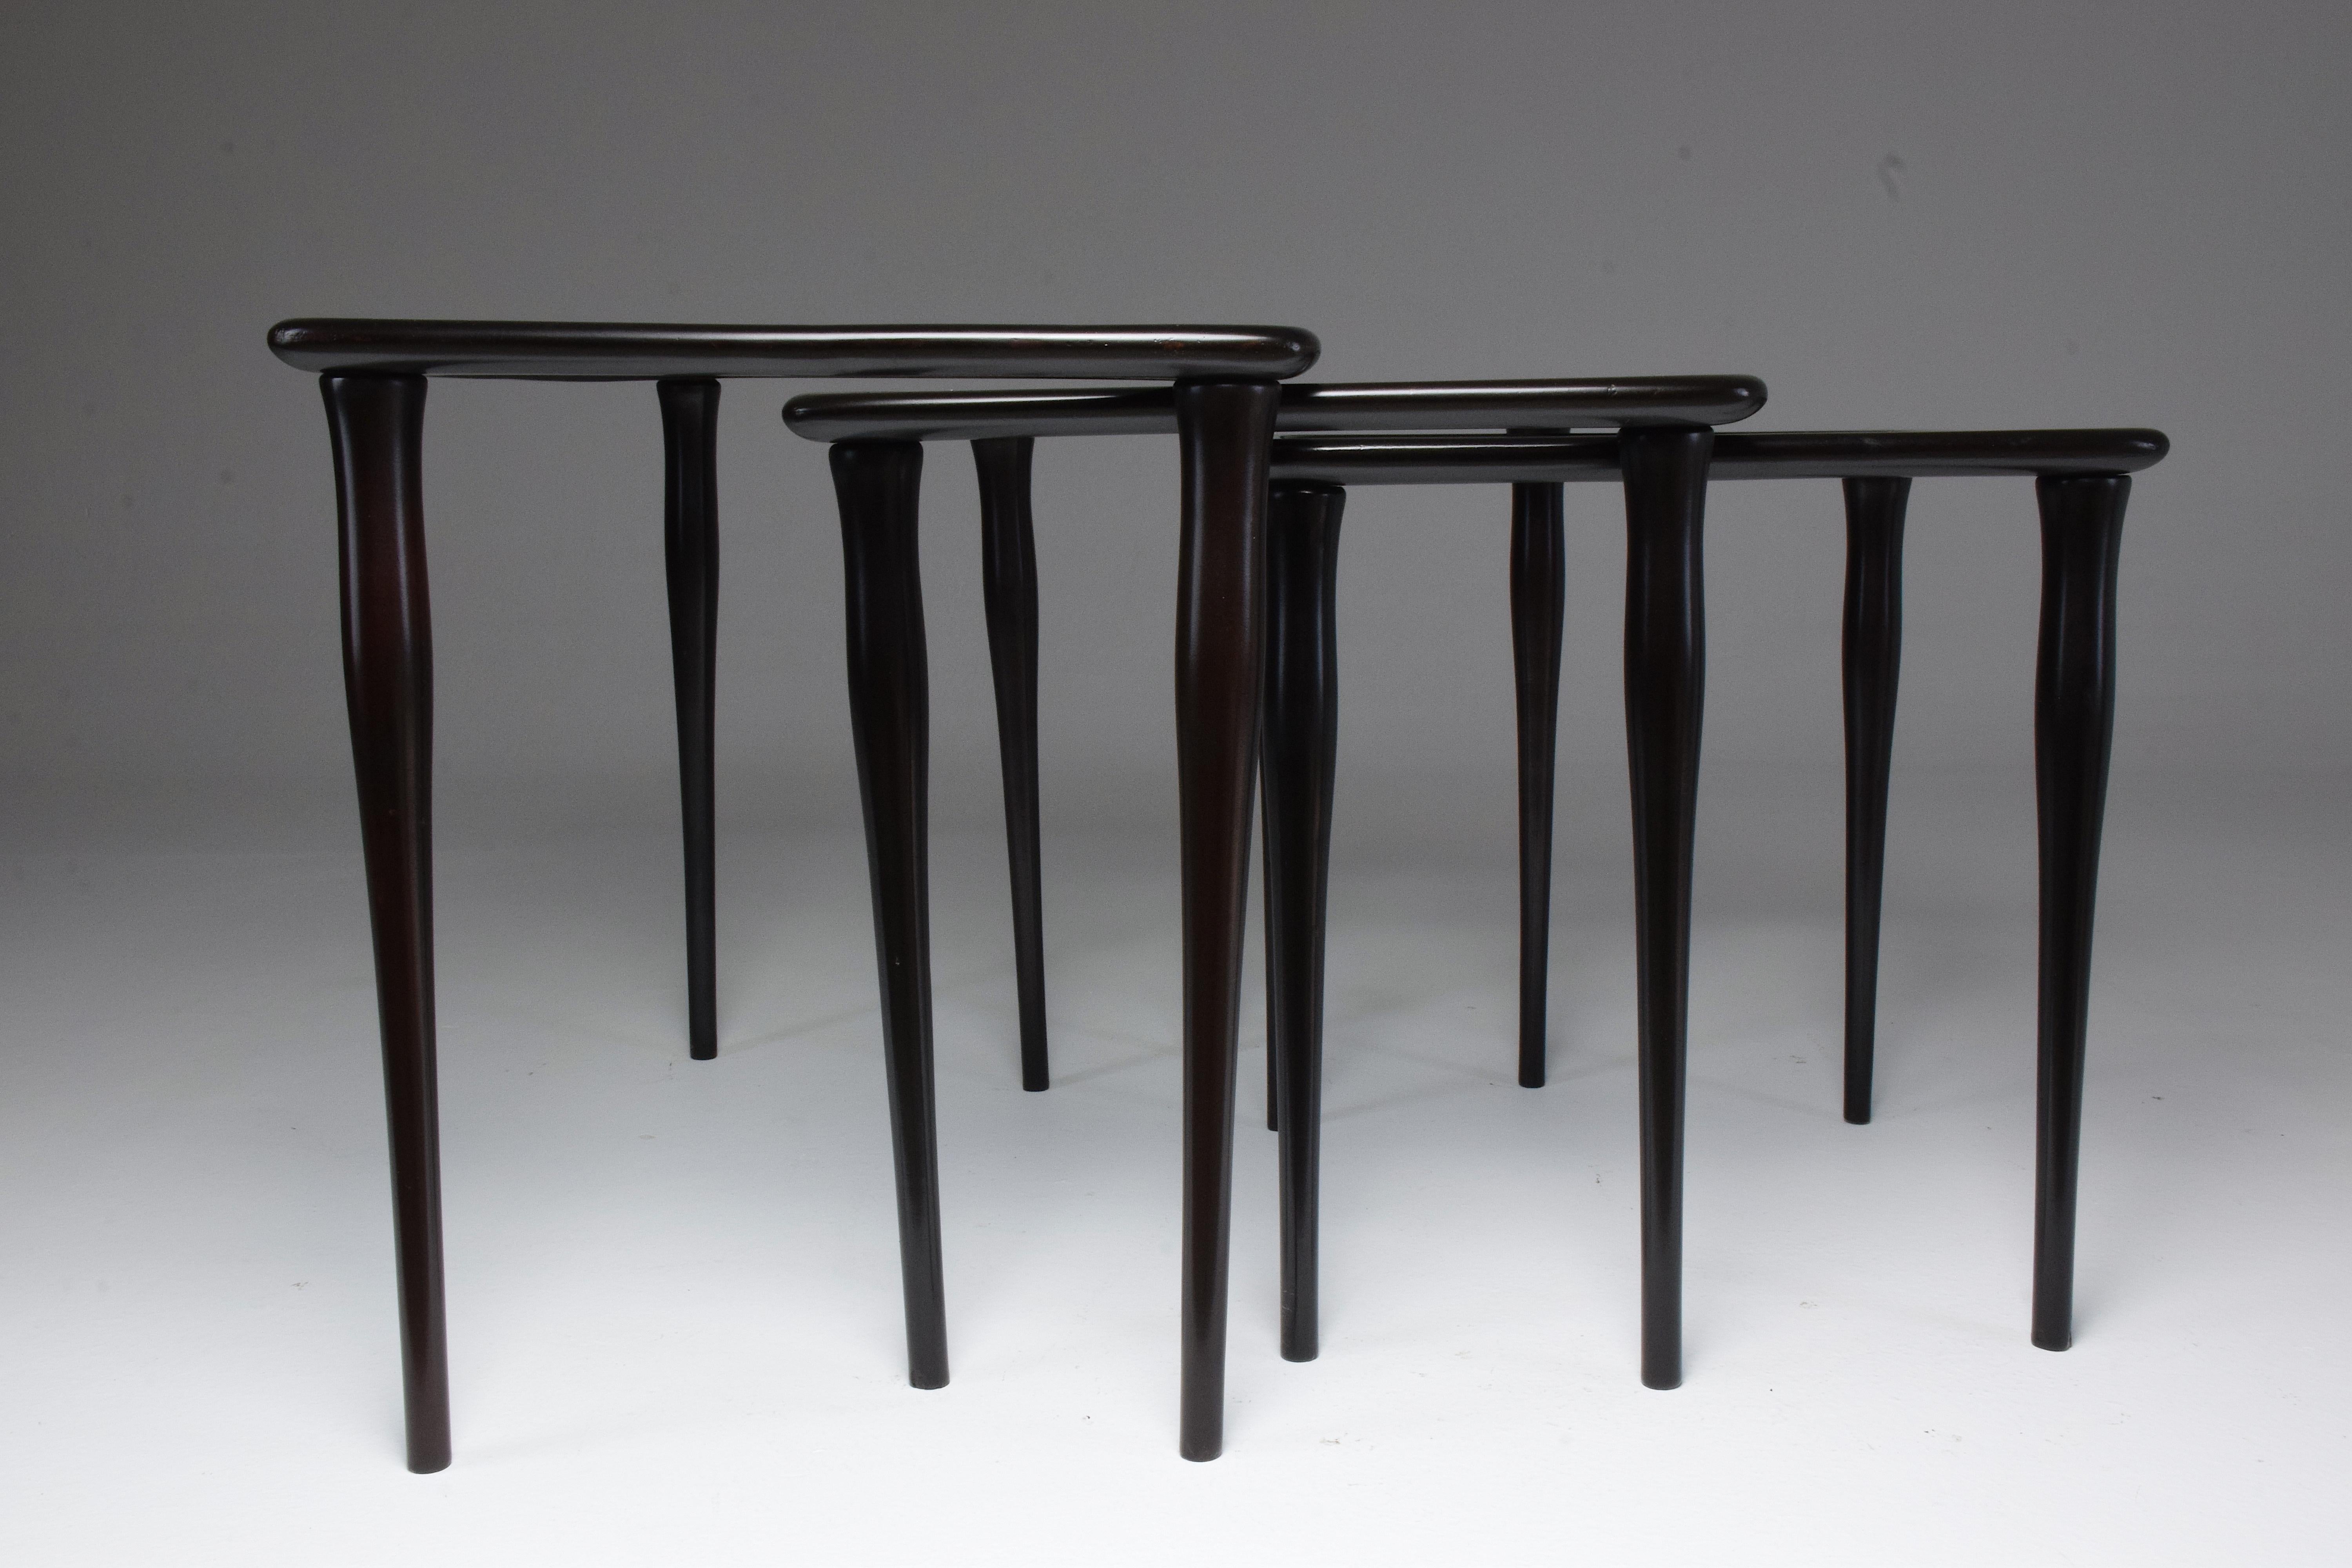 Three Italian Midcentury Nesting Tables by Ico Parisi, 1950s For Sale 3